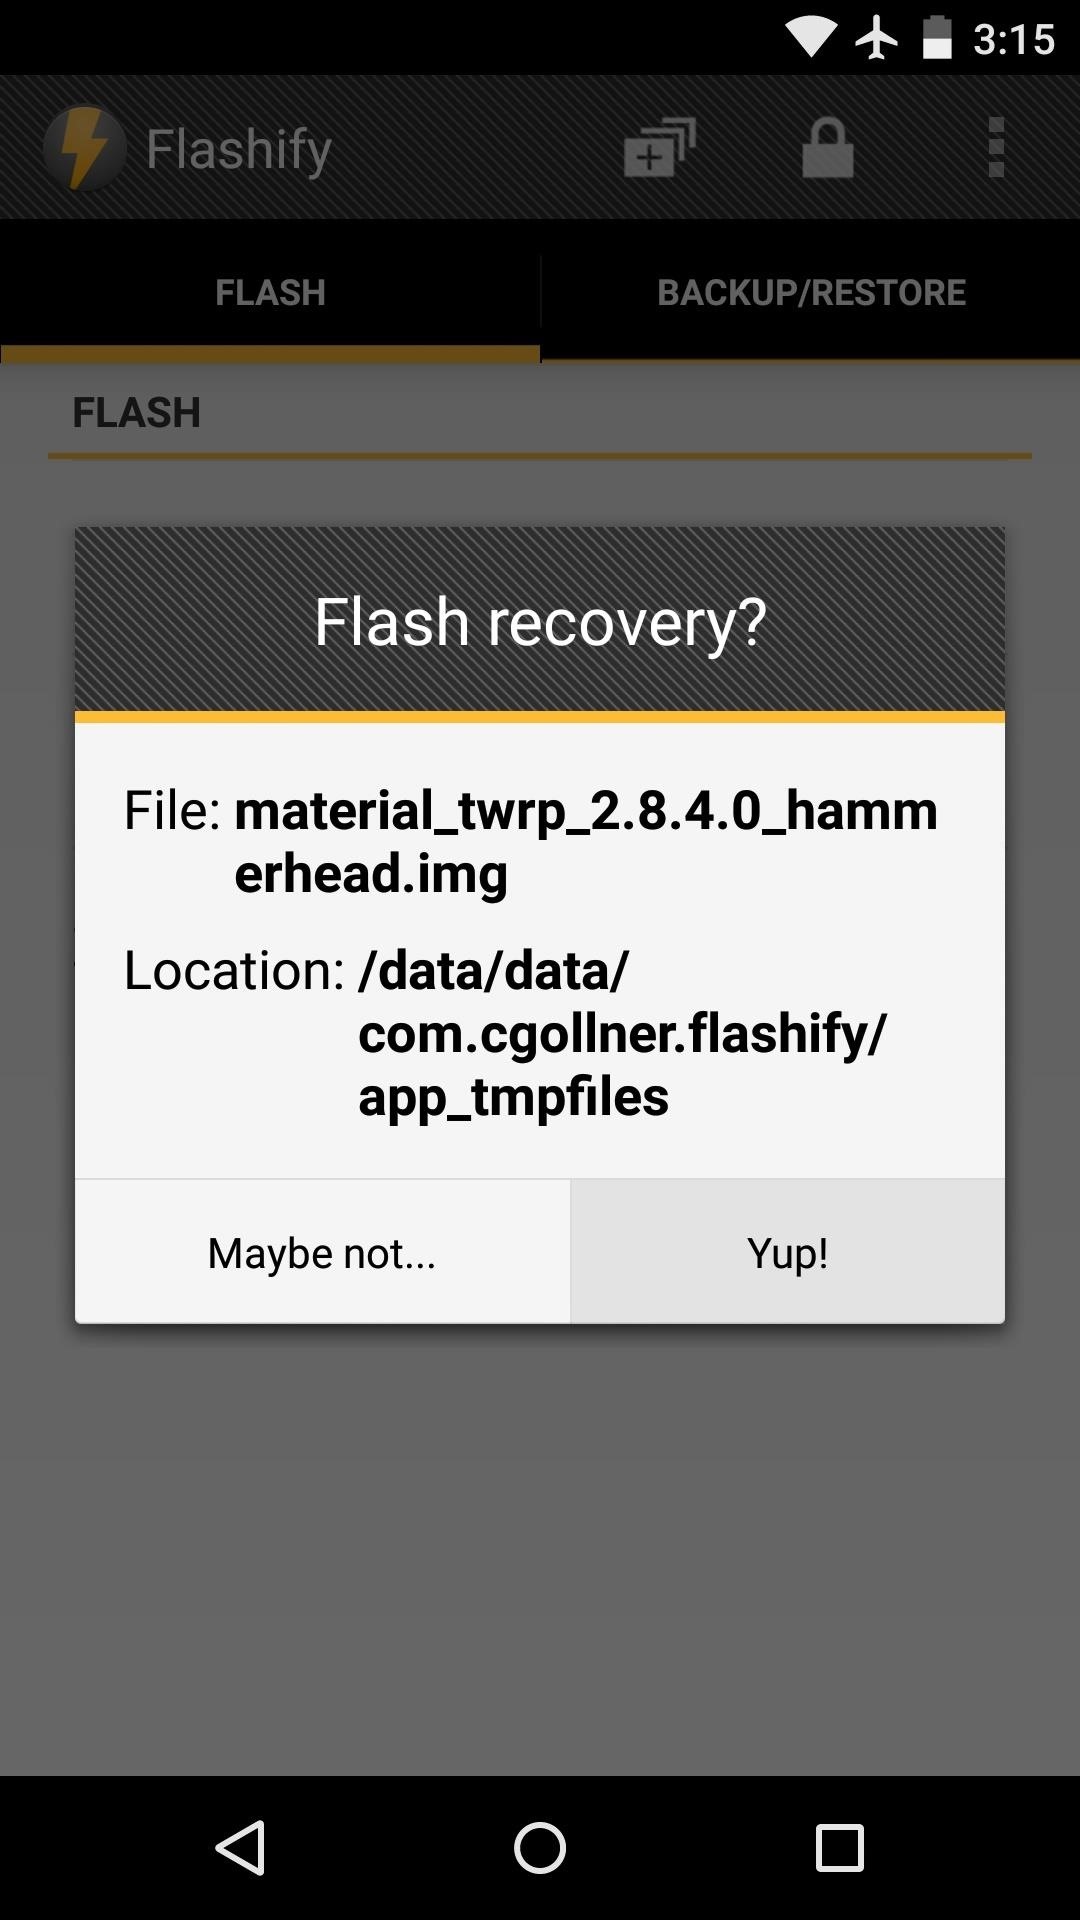 Update TWRP Recovery with a Material Design Theme on Your Nexus 5